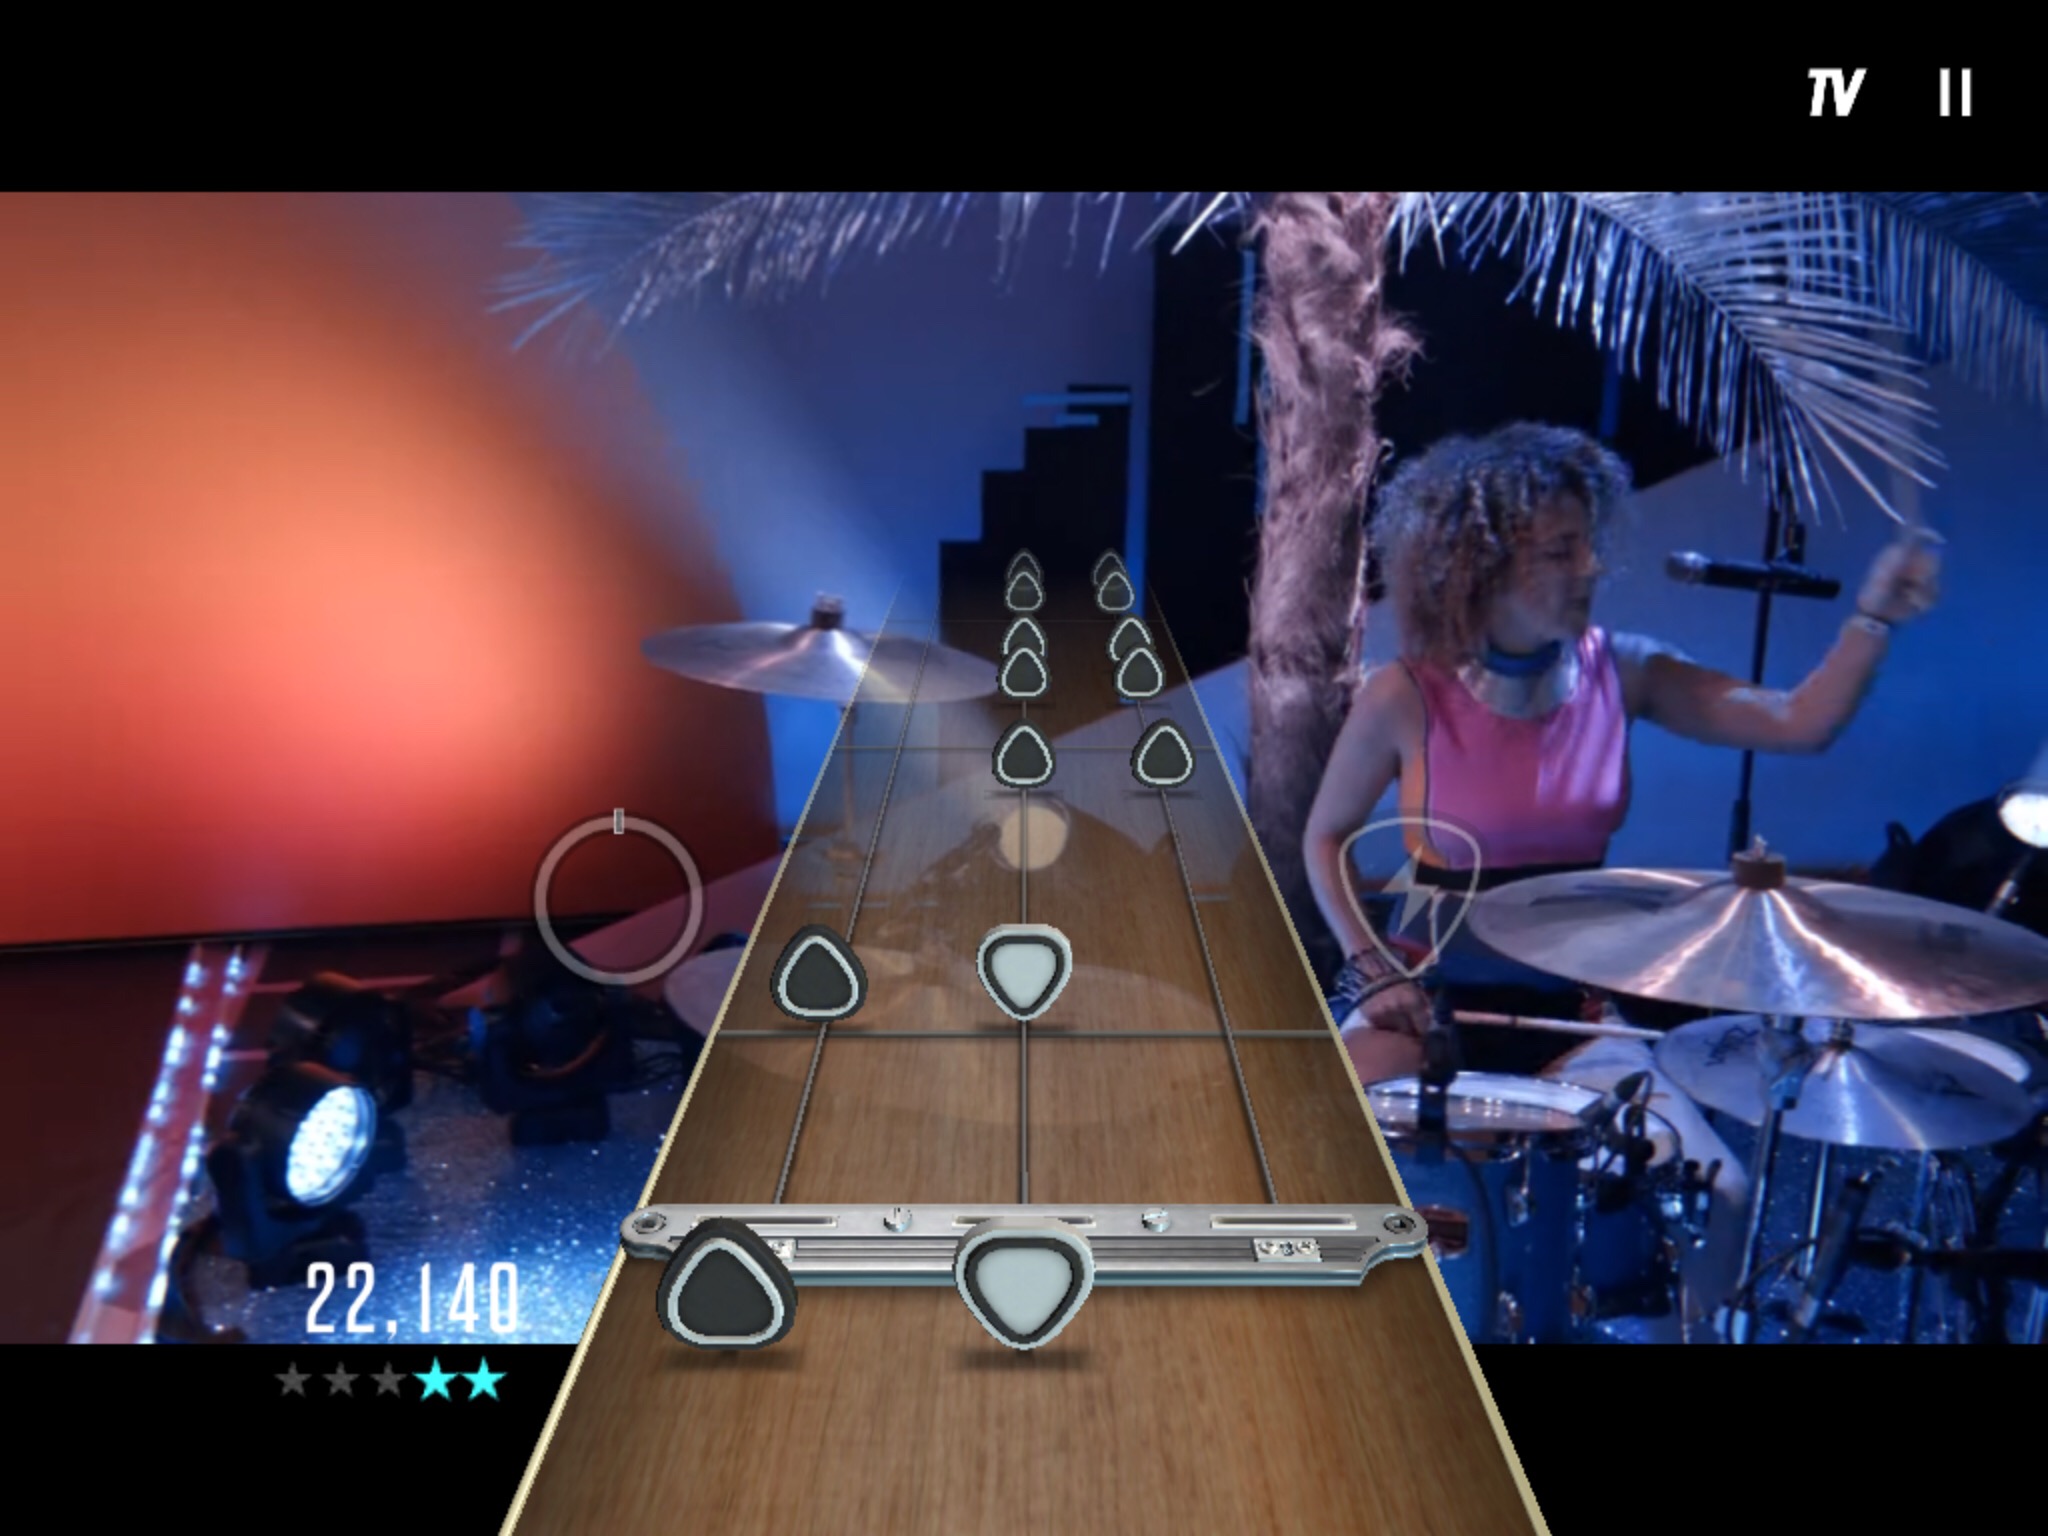 Guitar Hero Live Review - breathing new life into the music genre